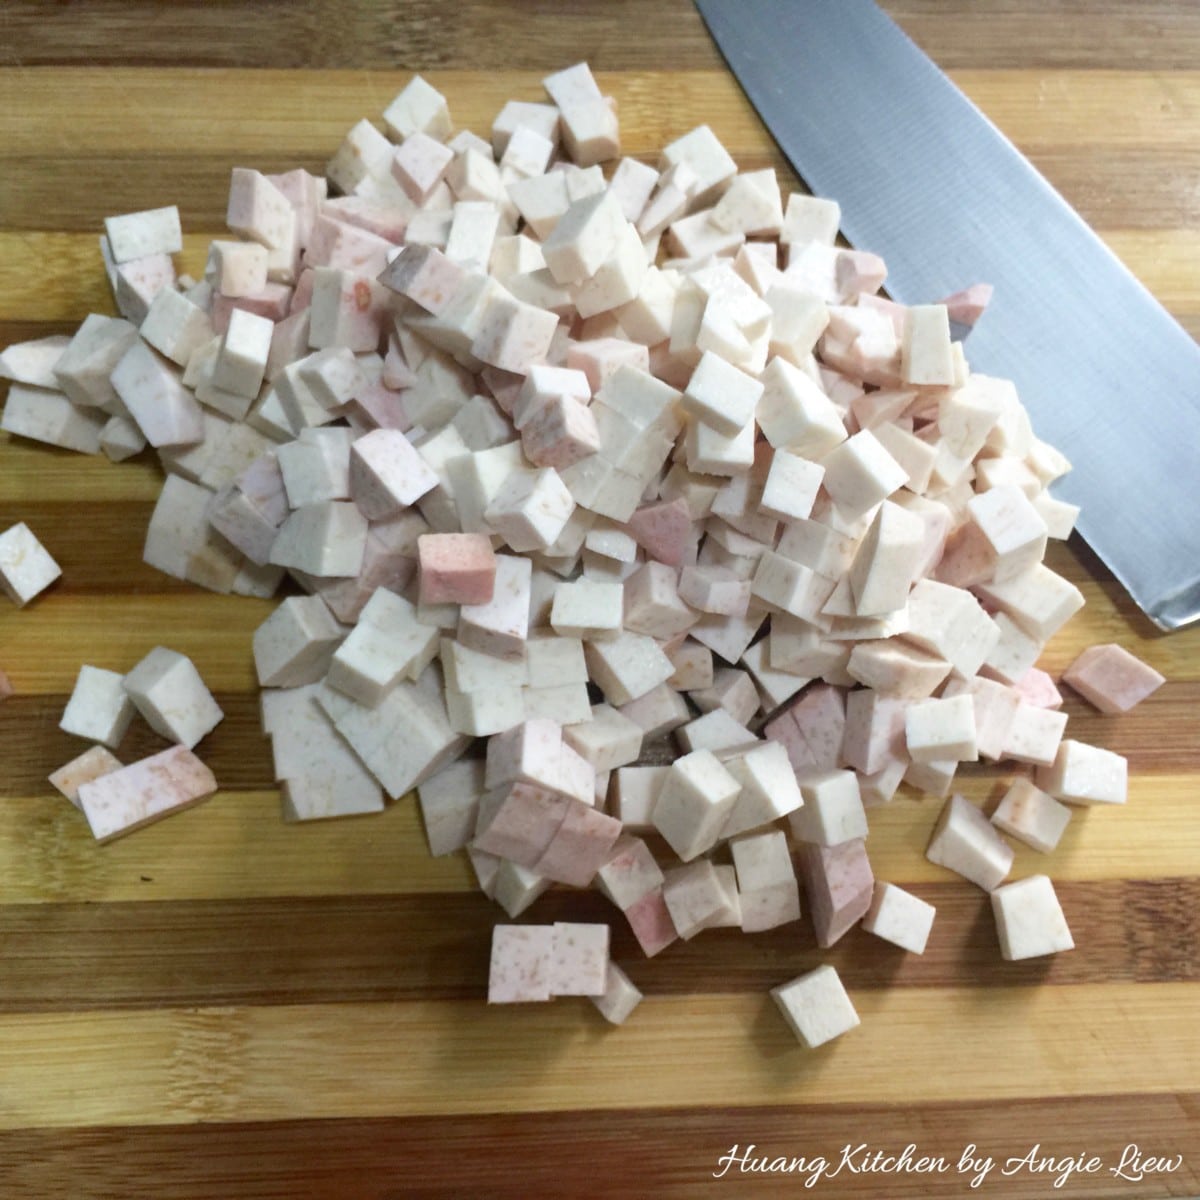 Peel and cut yam into small cubes.